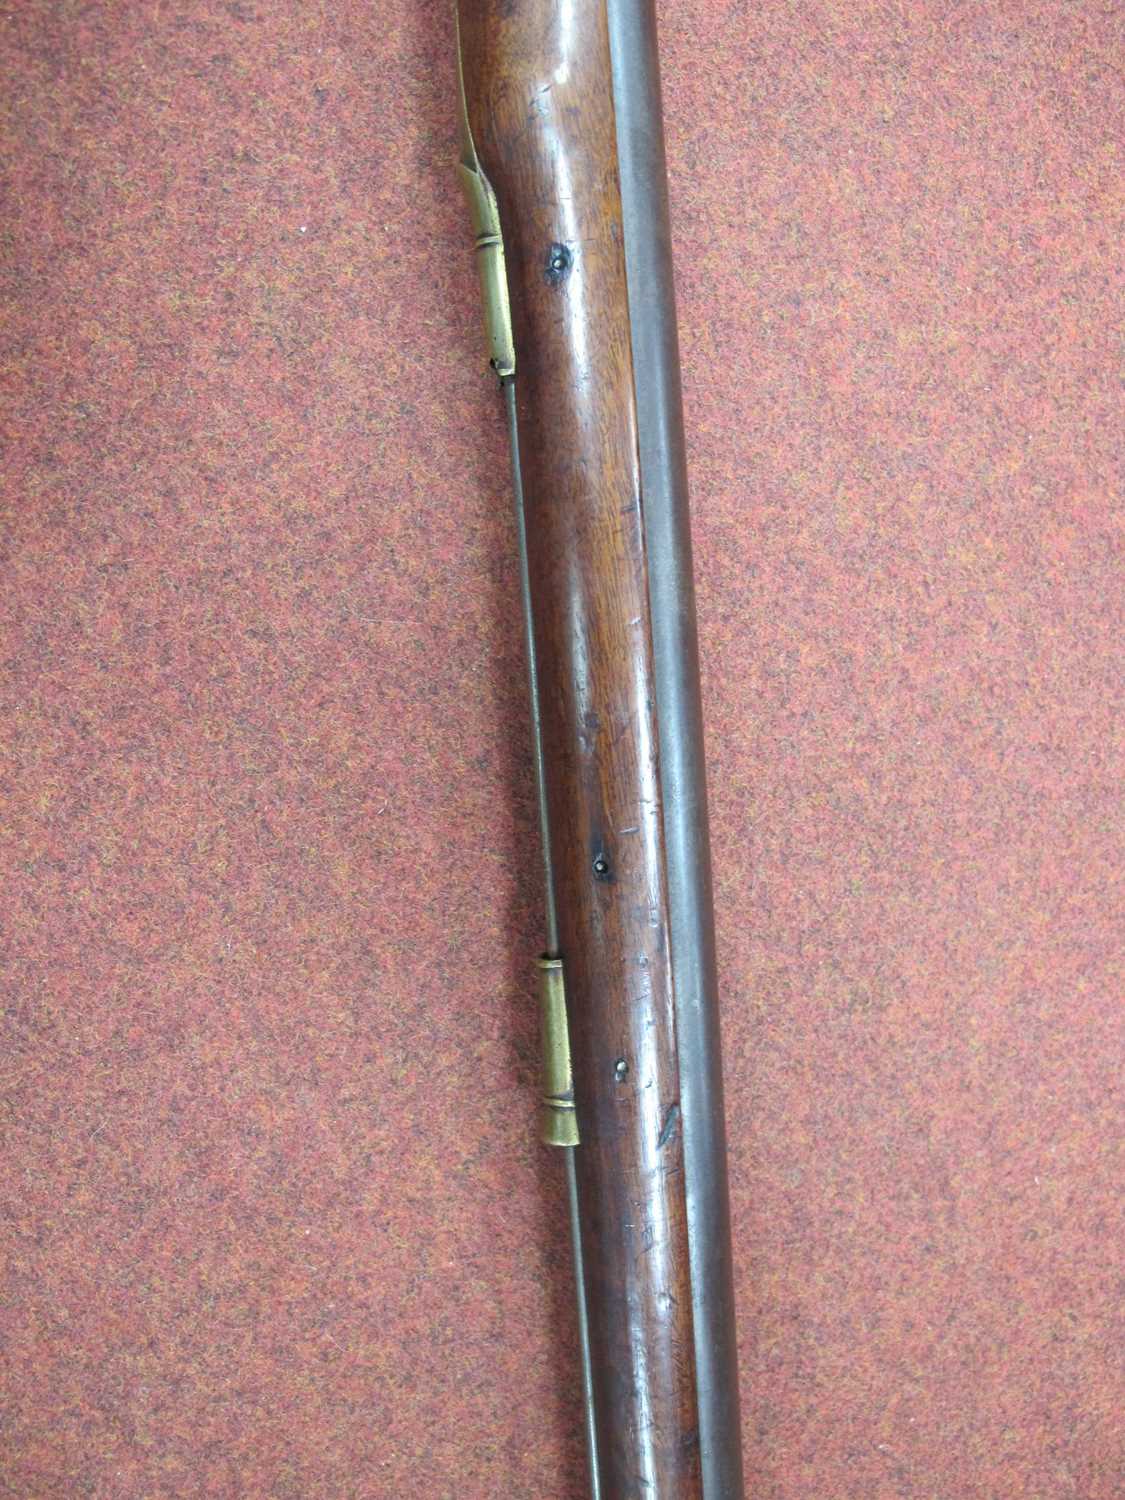 British India Pattern Circa 1810 'Brown Bess' Flintlock Musket, marked 'Tower' with 'GR' crown - Image 7 of 17